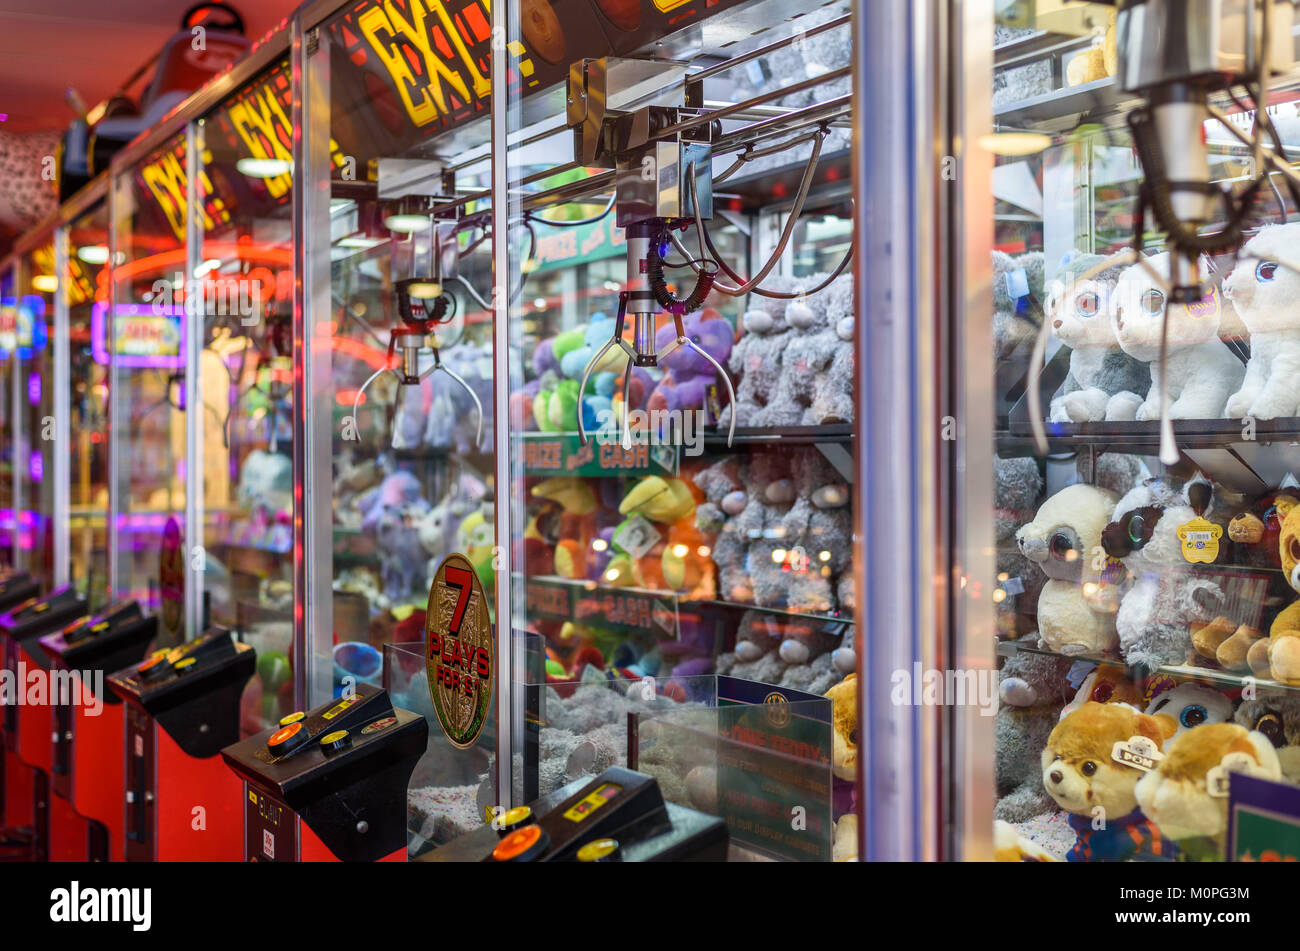 A row of coin operate cuddly toy grabbers in an amusement arcade, Llandudno, Wales, Uk. Stock Photo